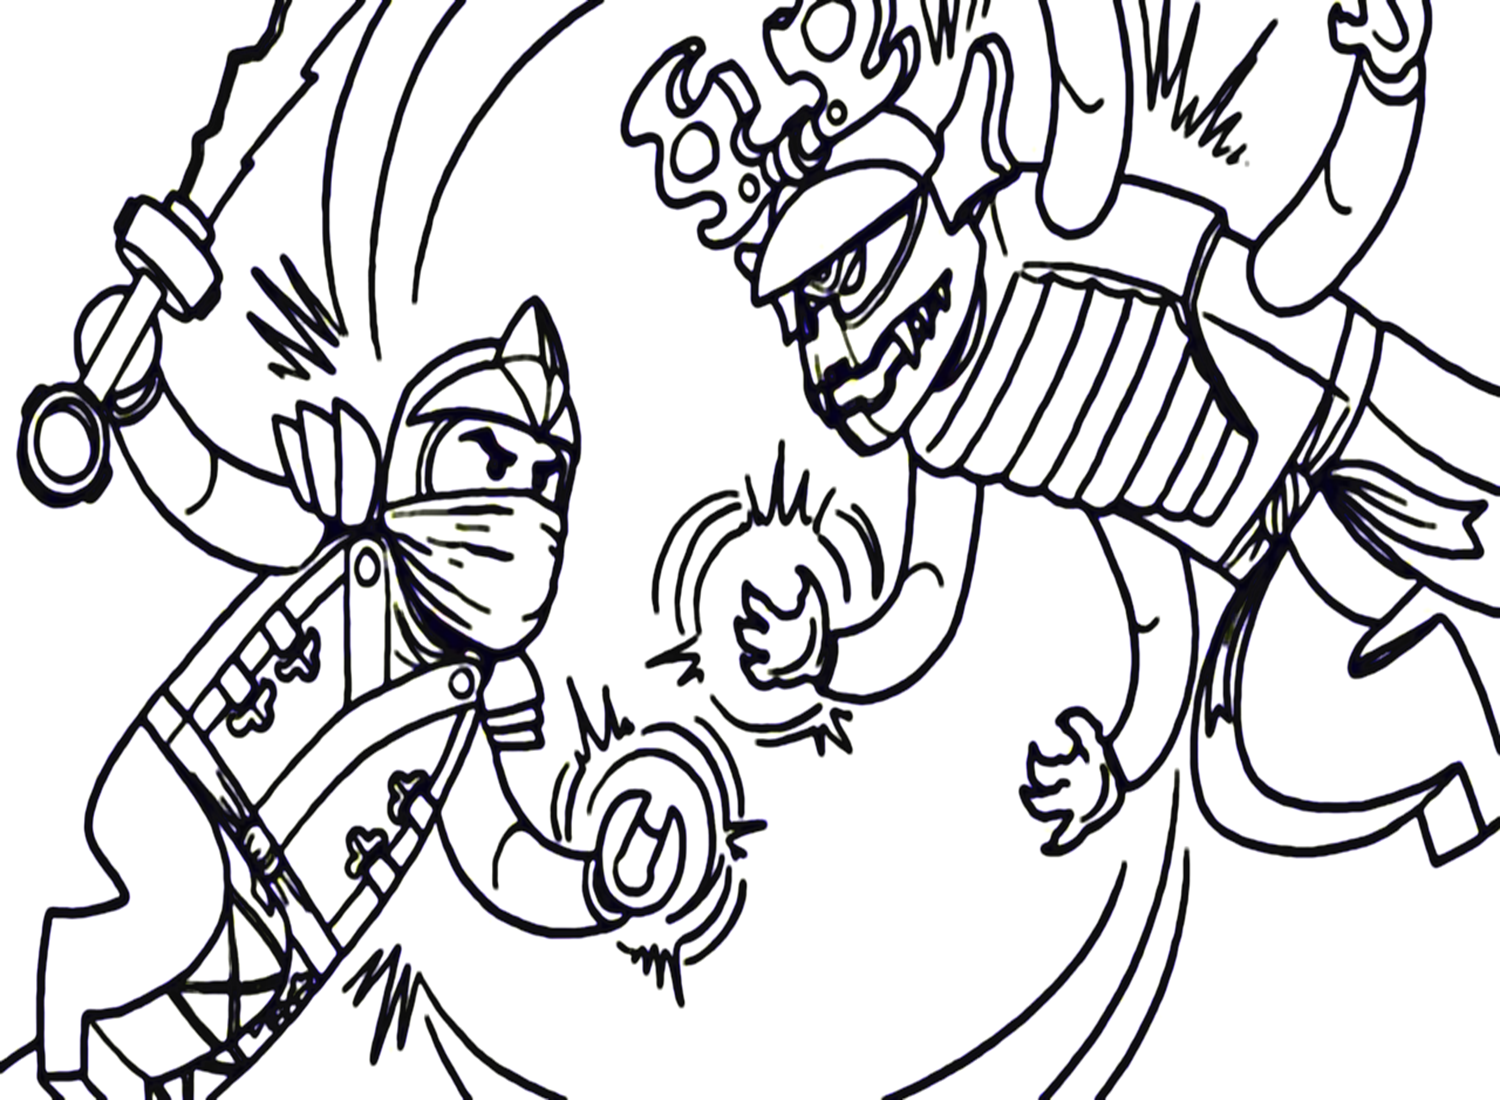 Lloyd Garmadon Fights To Lord Garmadon Coloring Pages